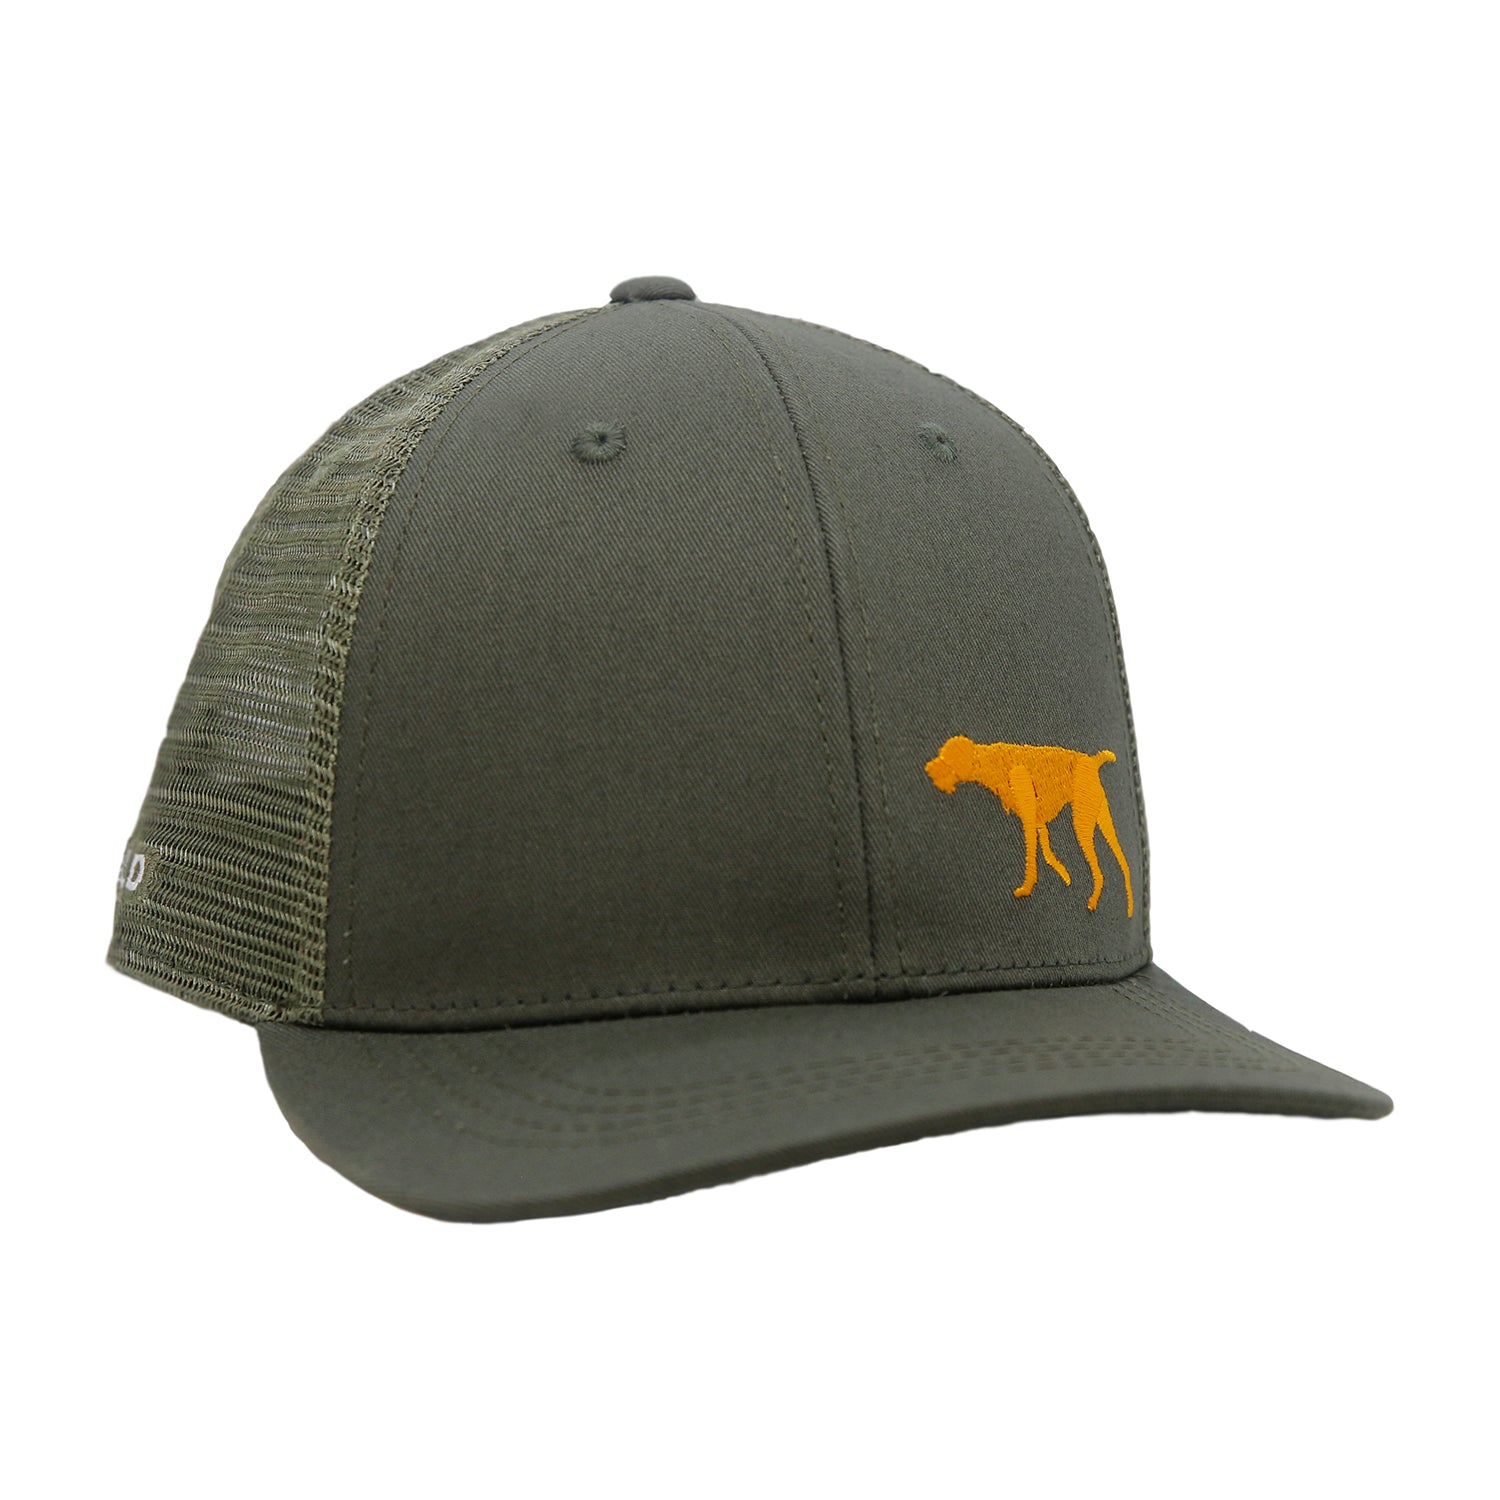 Green hat with green mesh back and a embroidered dog in orange on the front